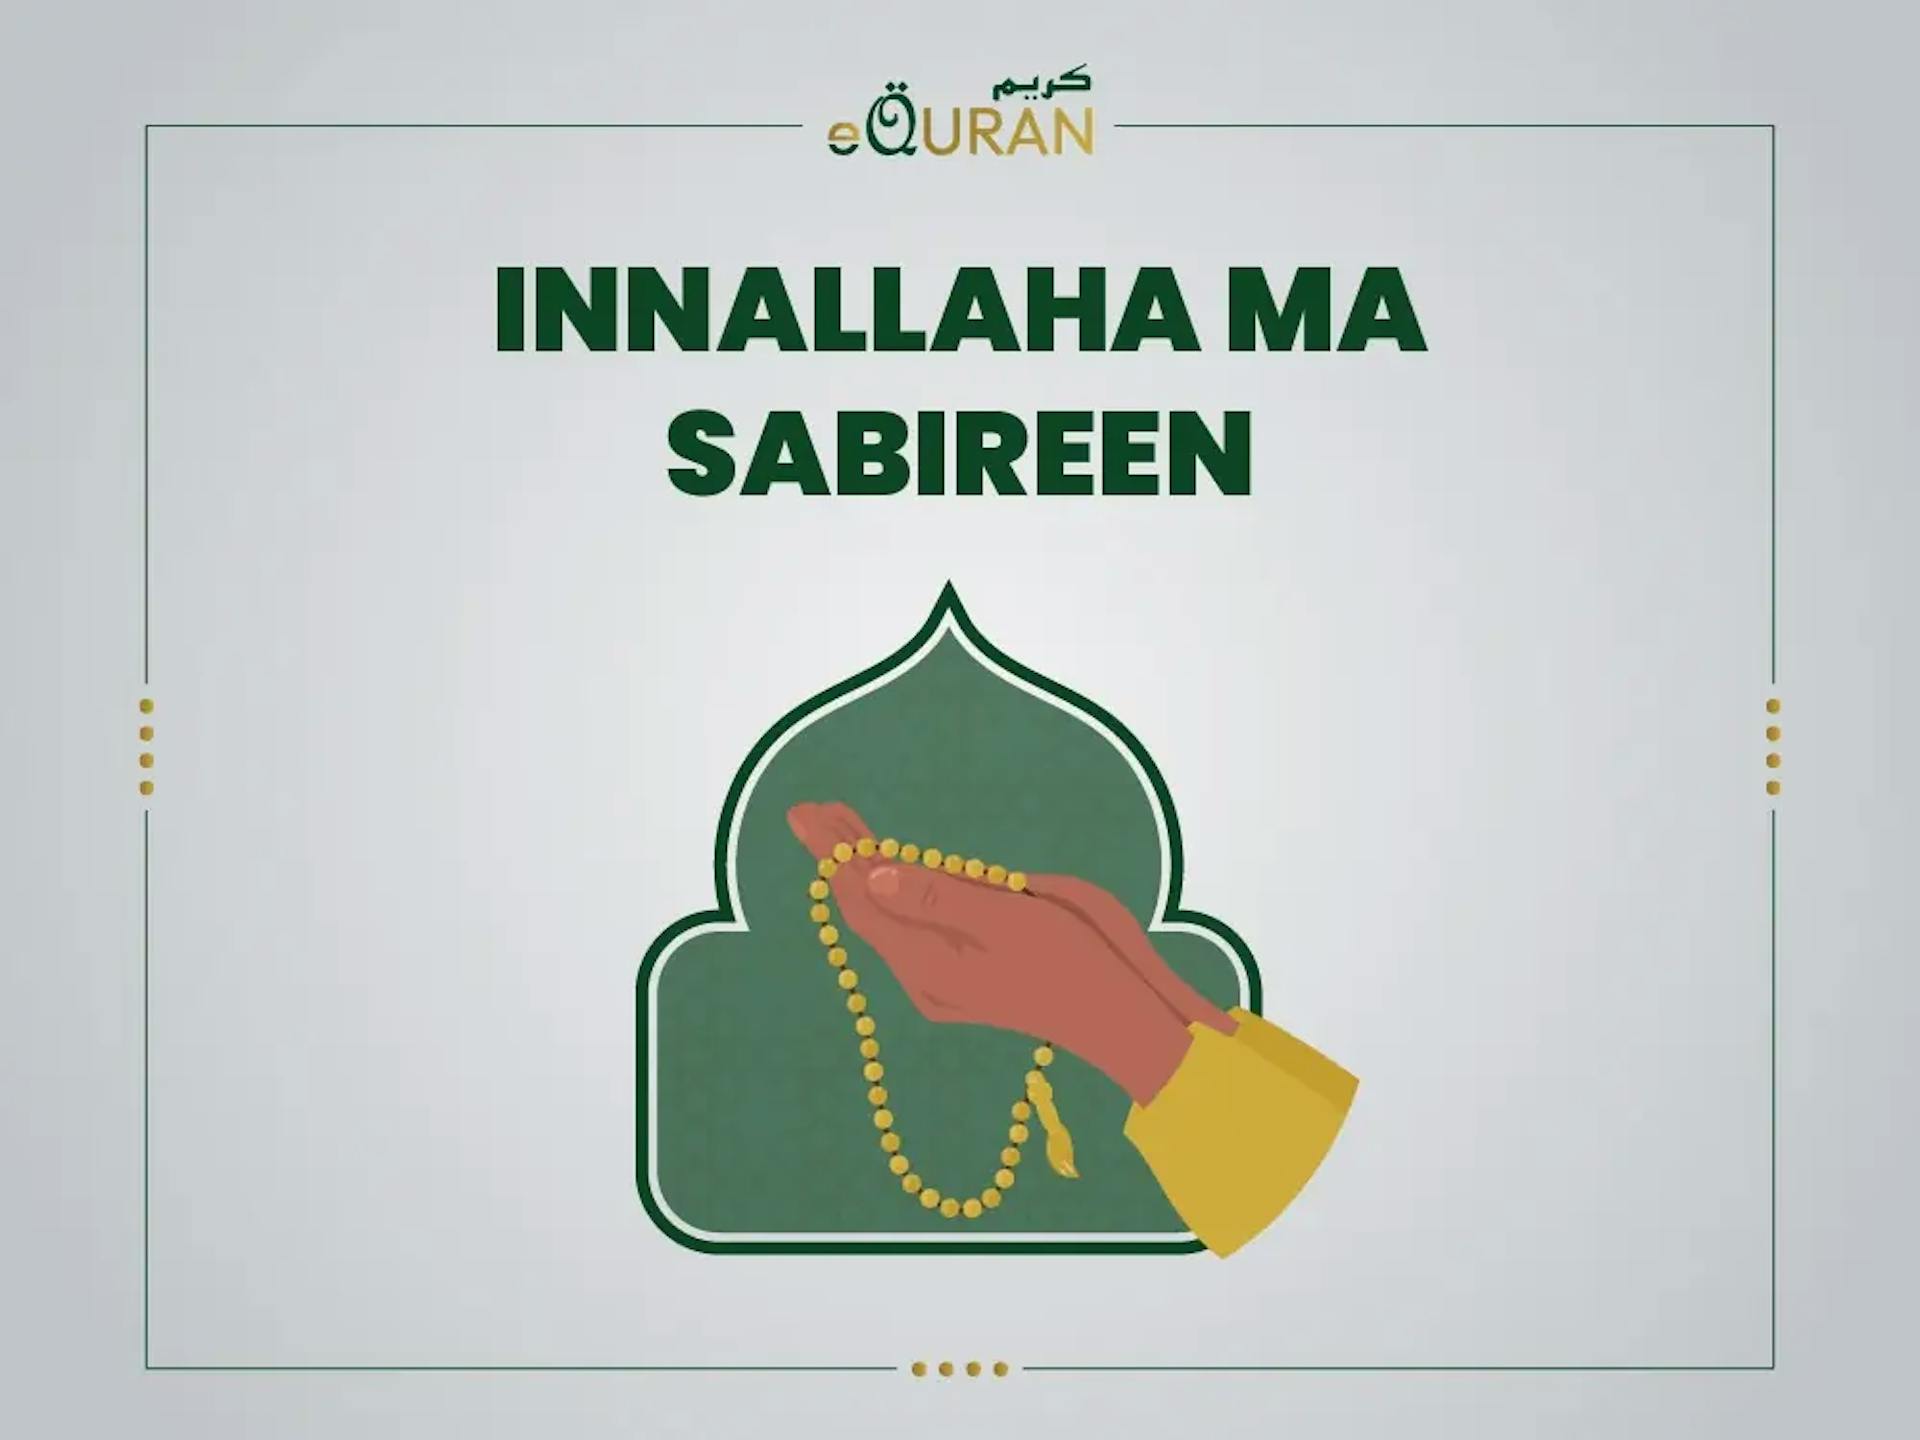 Innallaha ma Sabireen is a phrase taken from the quran verses which mean Allah is with those who are patient while ups and down of life.